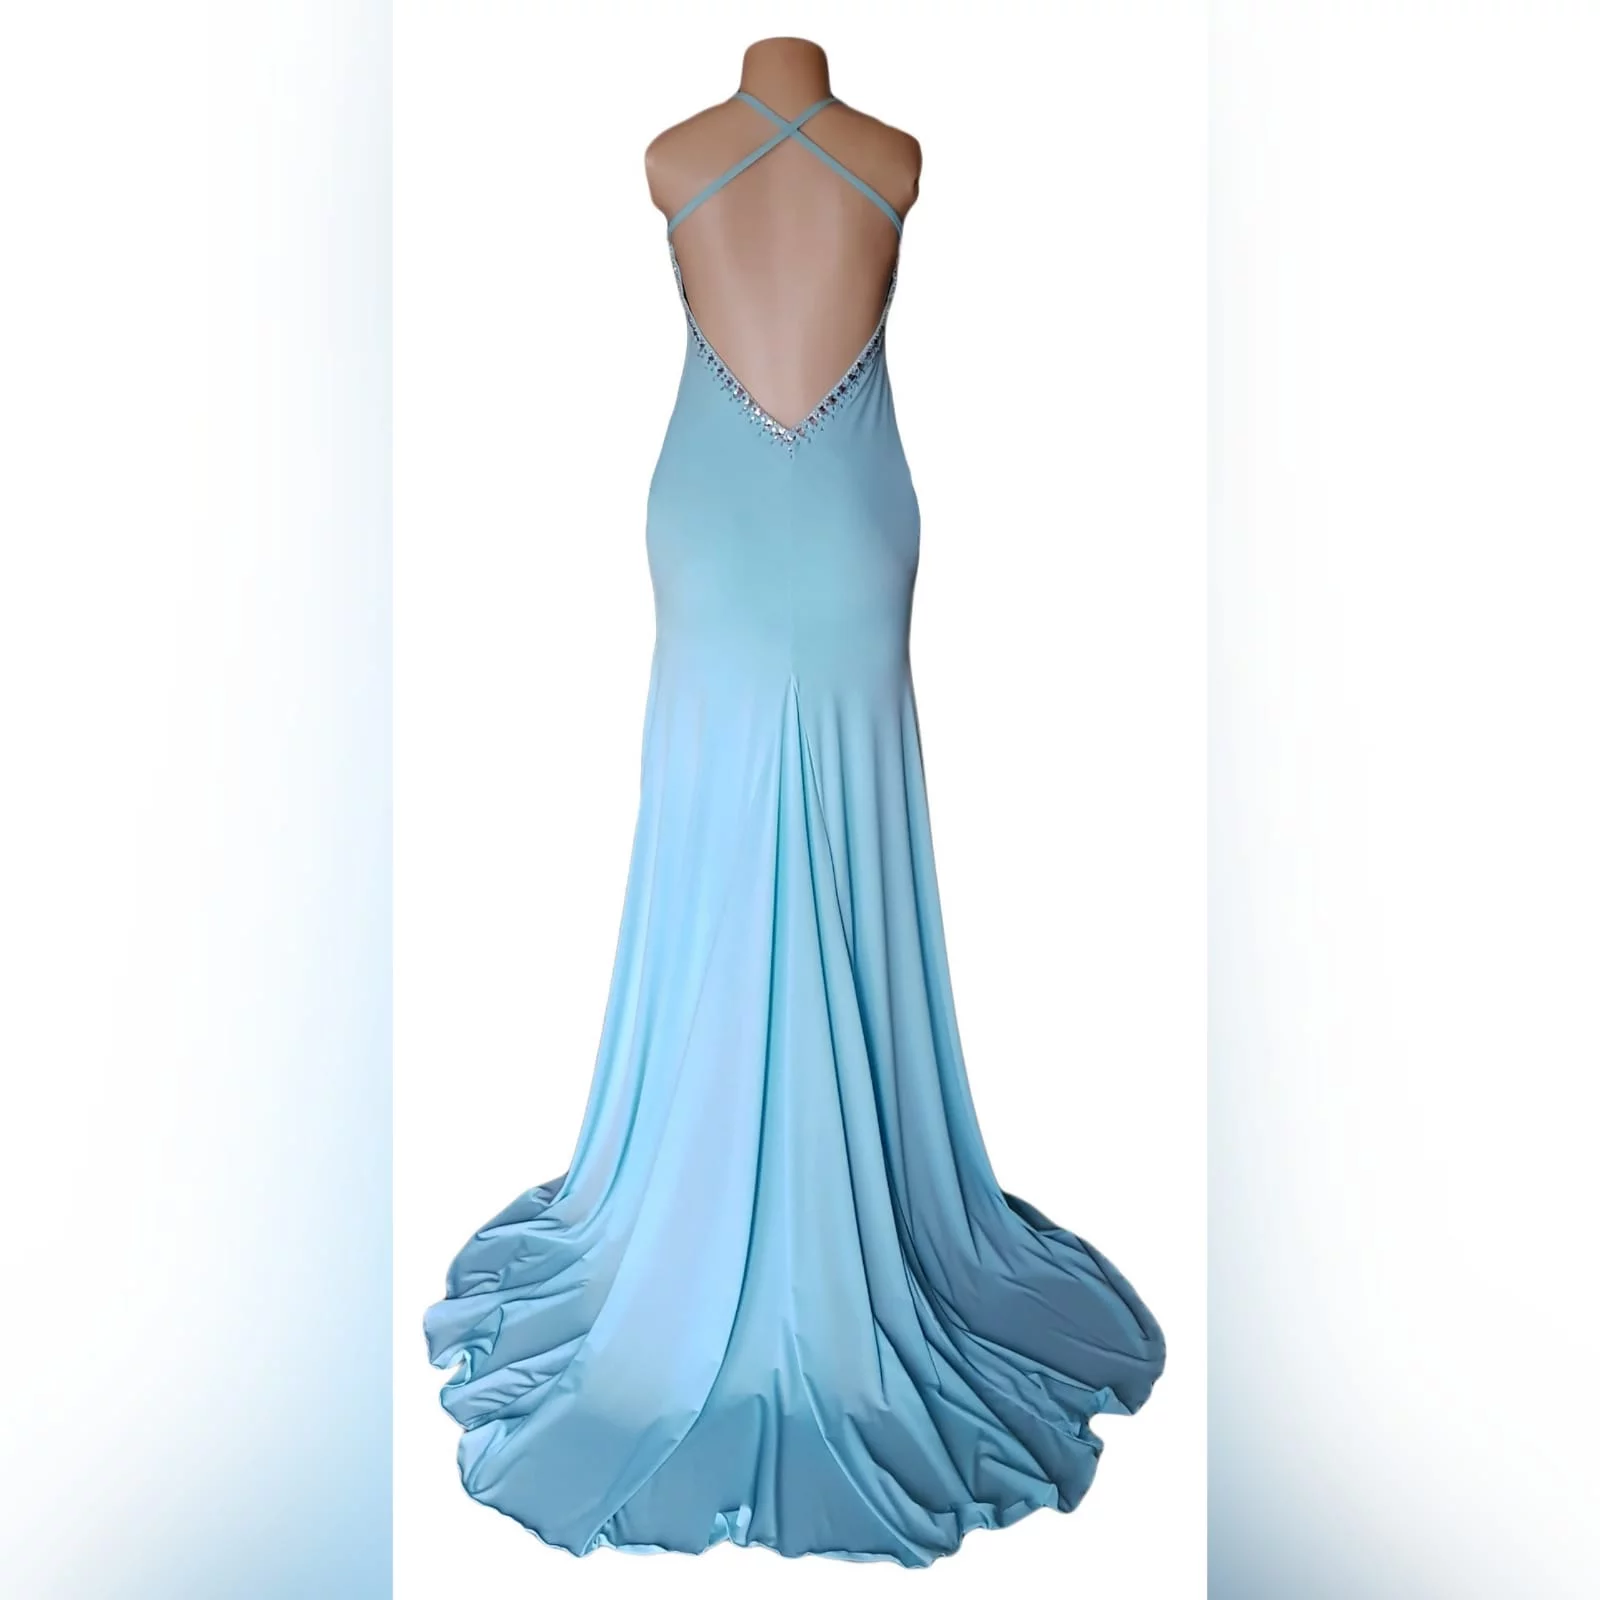 Aqua blue and silver prom dress 5 aqua blue and silver prom dress with a rounded neckline, open low v back with thin crossed straps, slit and a train. Dress detailed with silver beads and stones.